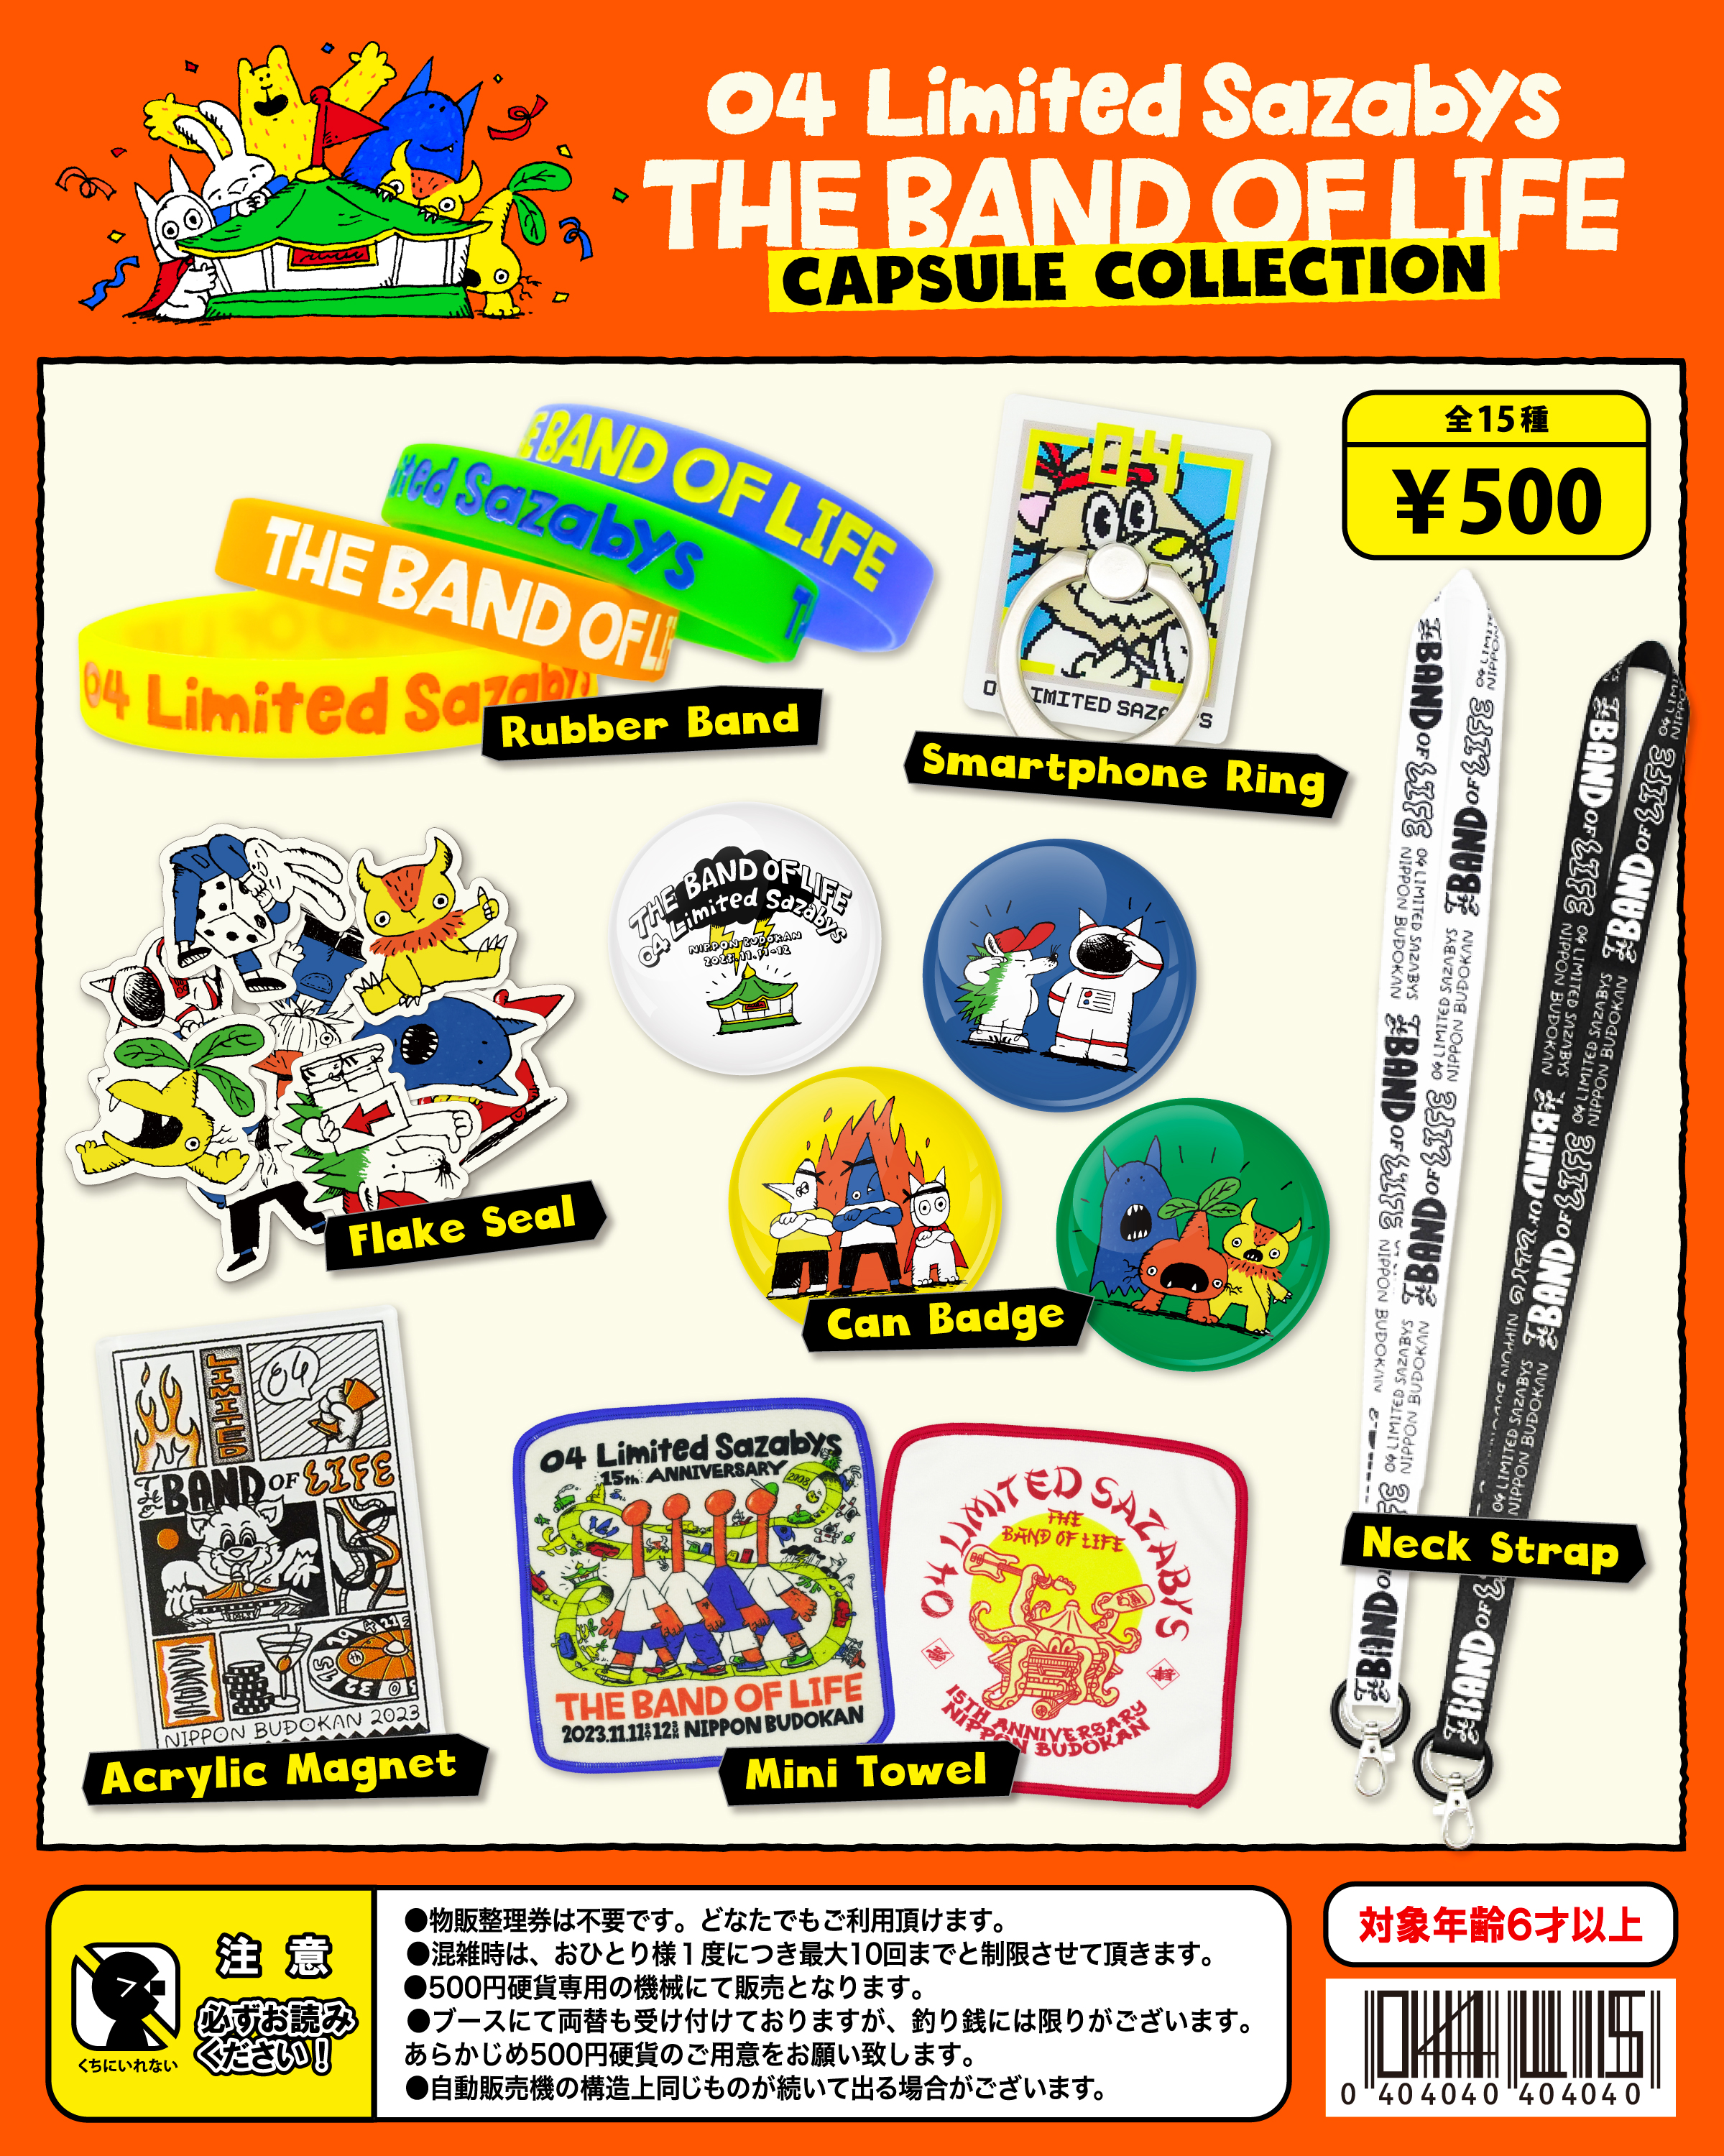 CAPSULE COLLECTIONが登場〜！